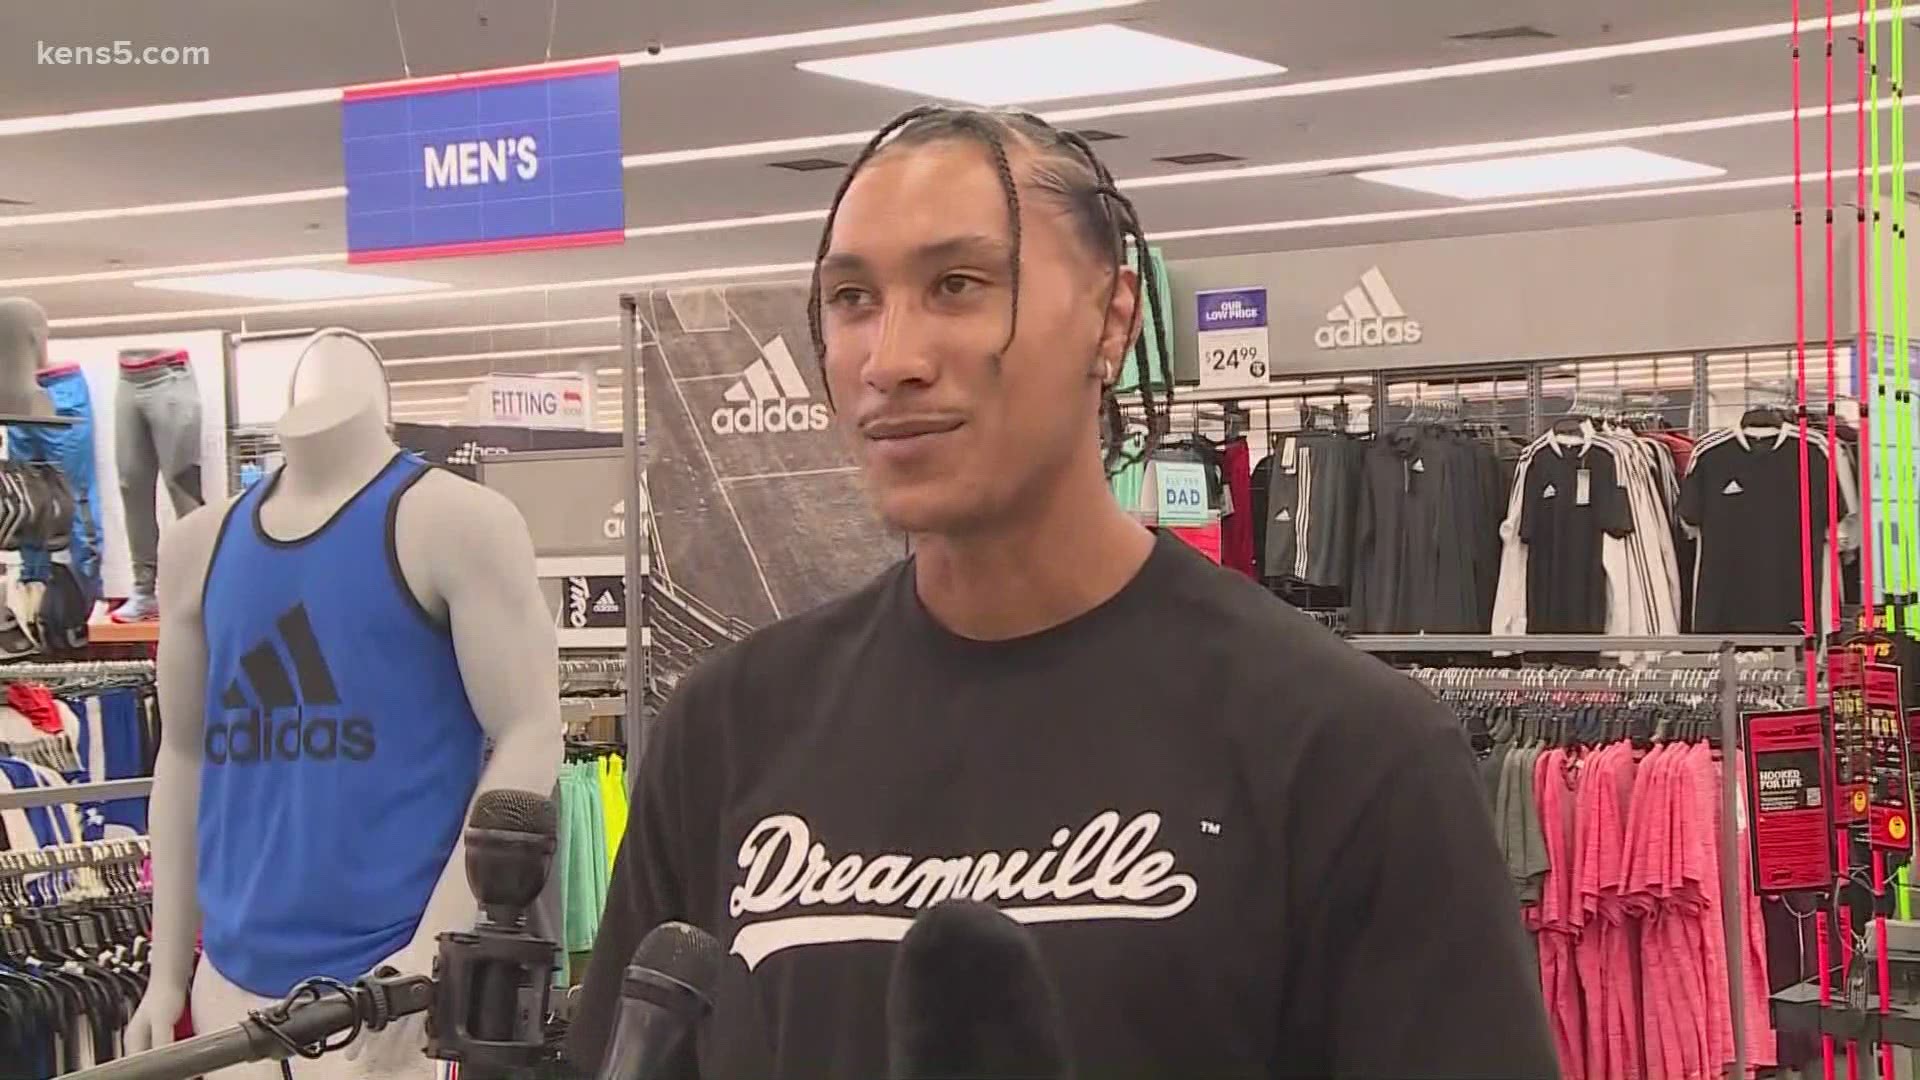 San Antonio native and Tennessee Titans wide receiver Josh Reynolds helped local kids shop for Father's Day gifts.